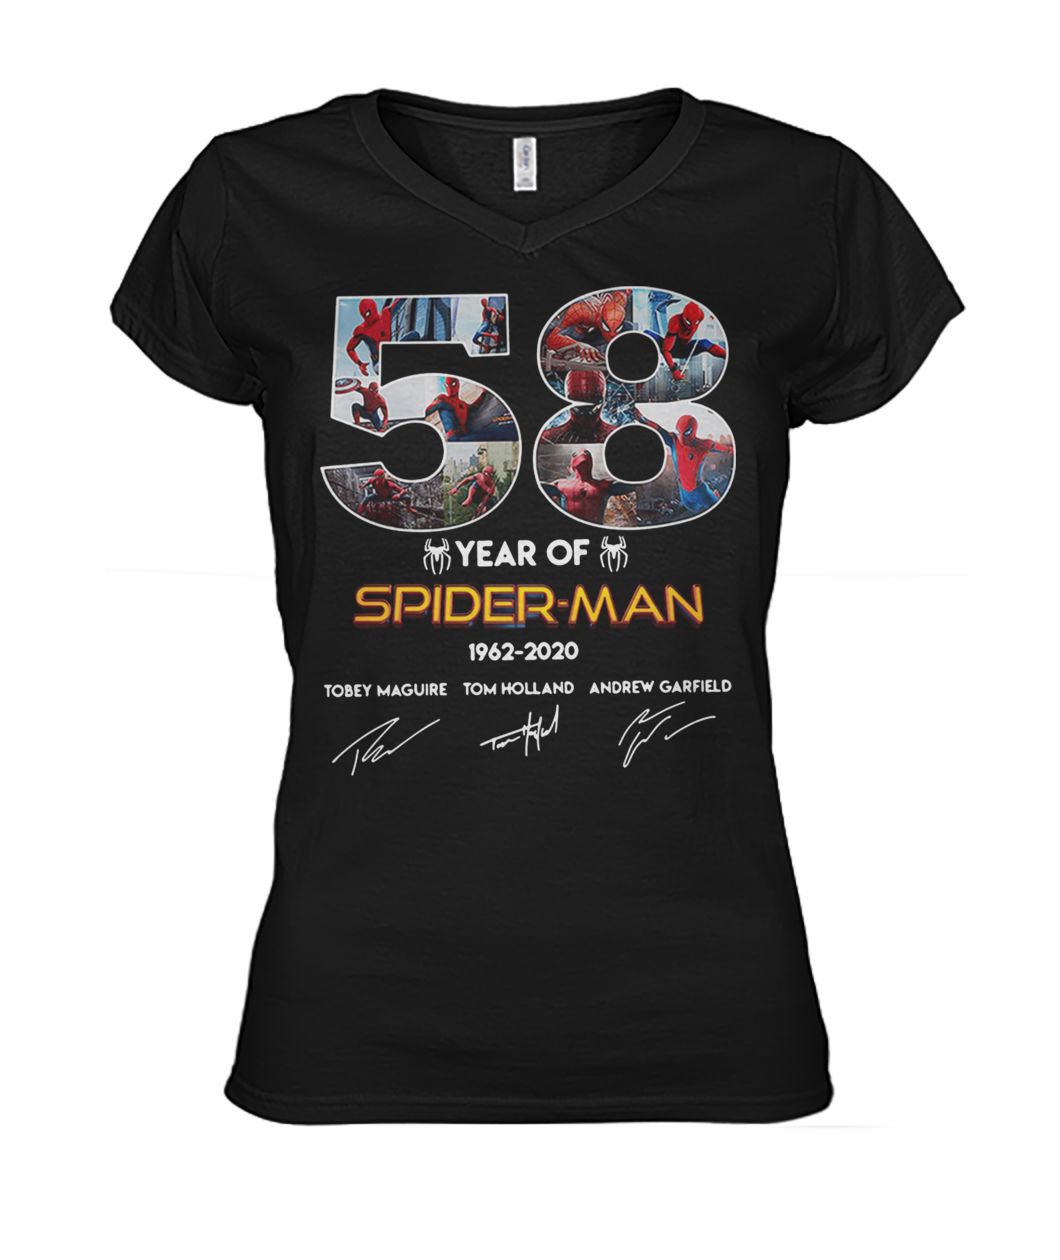 58 year of spider-man 1962 2020 signatures women's v-neck